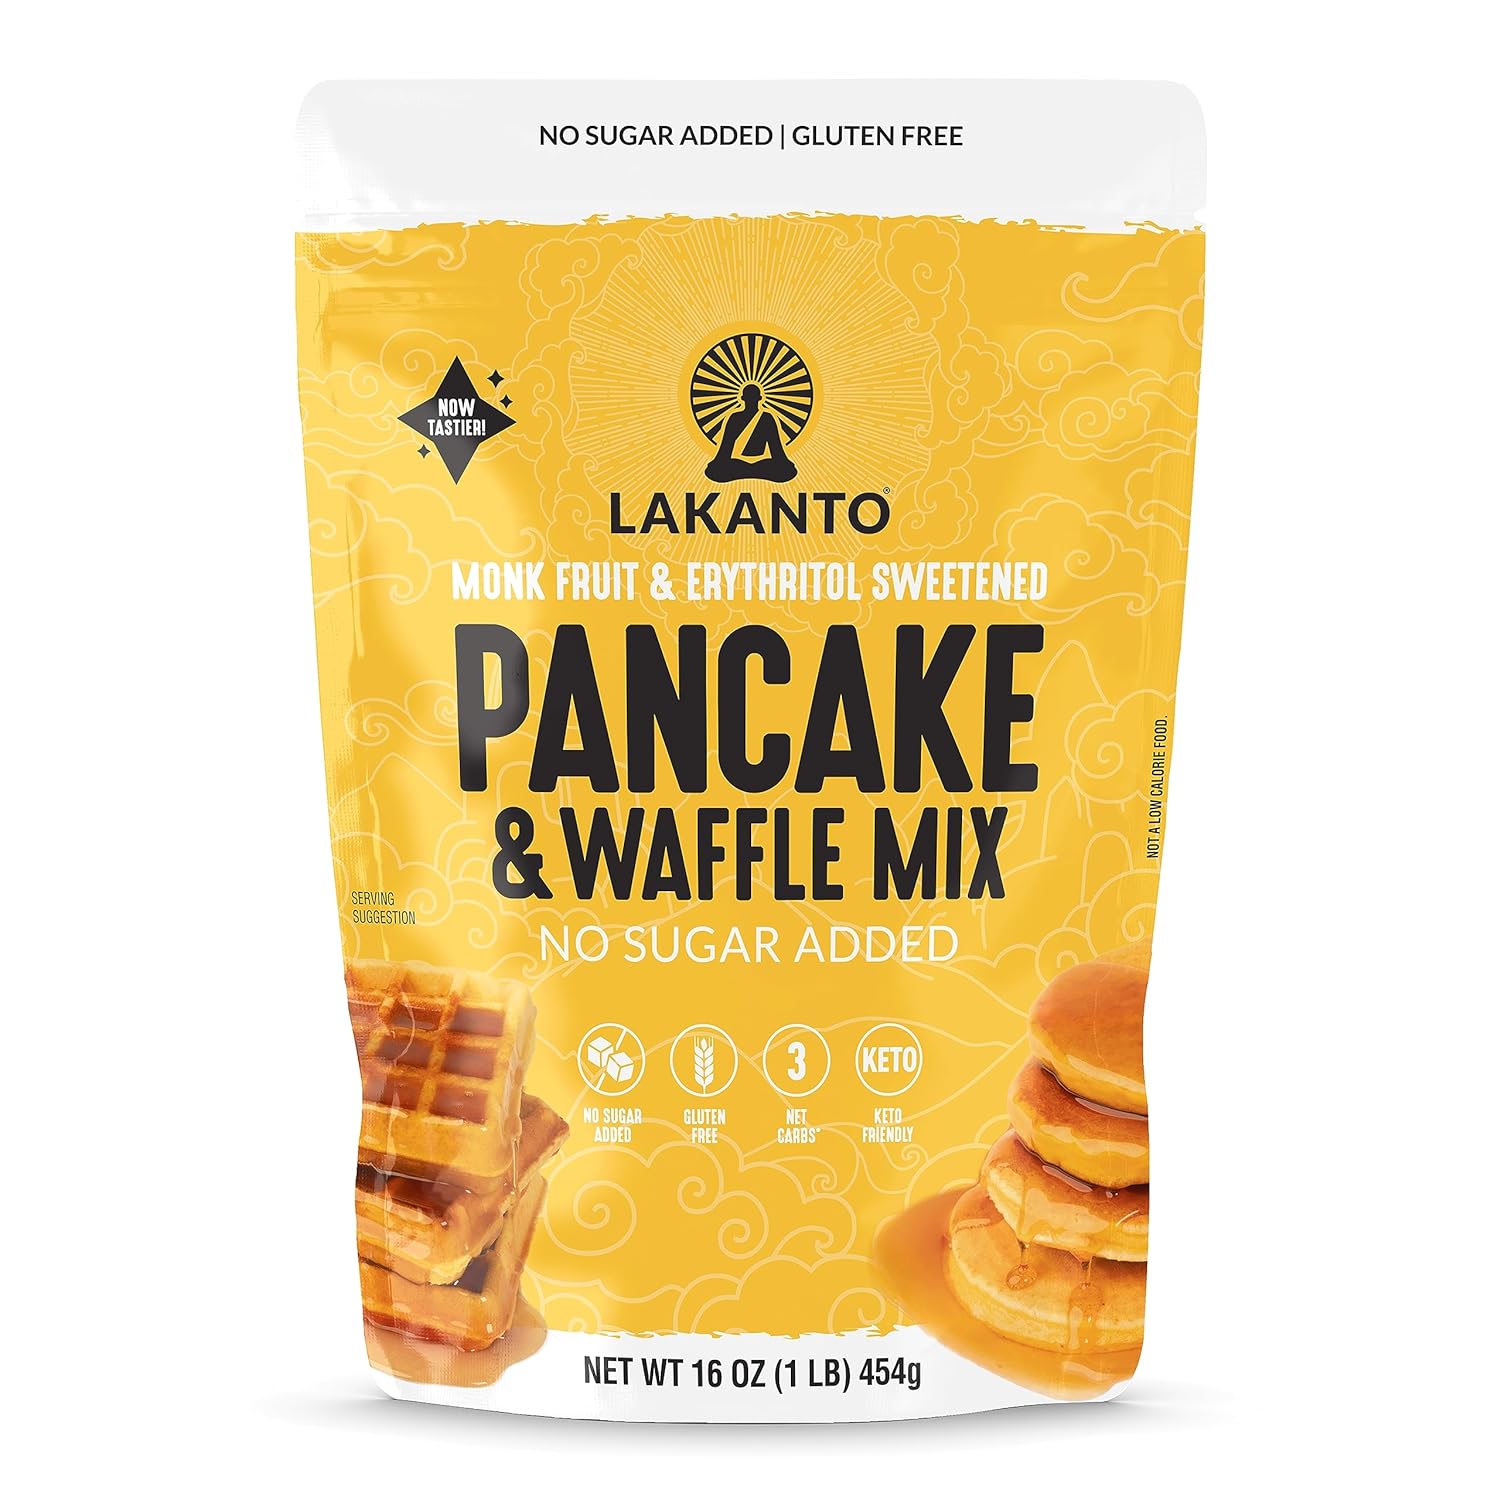 Lakanto Pancake and Waffle Mix (Reformulated) - Sweetened with Monk Fruit Sweetener and Erythritol, Breakfast, No Added Sugar, Gluten Free, Keto Diet Friendly - 16 oz